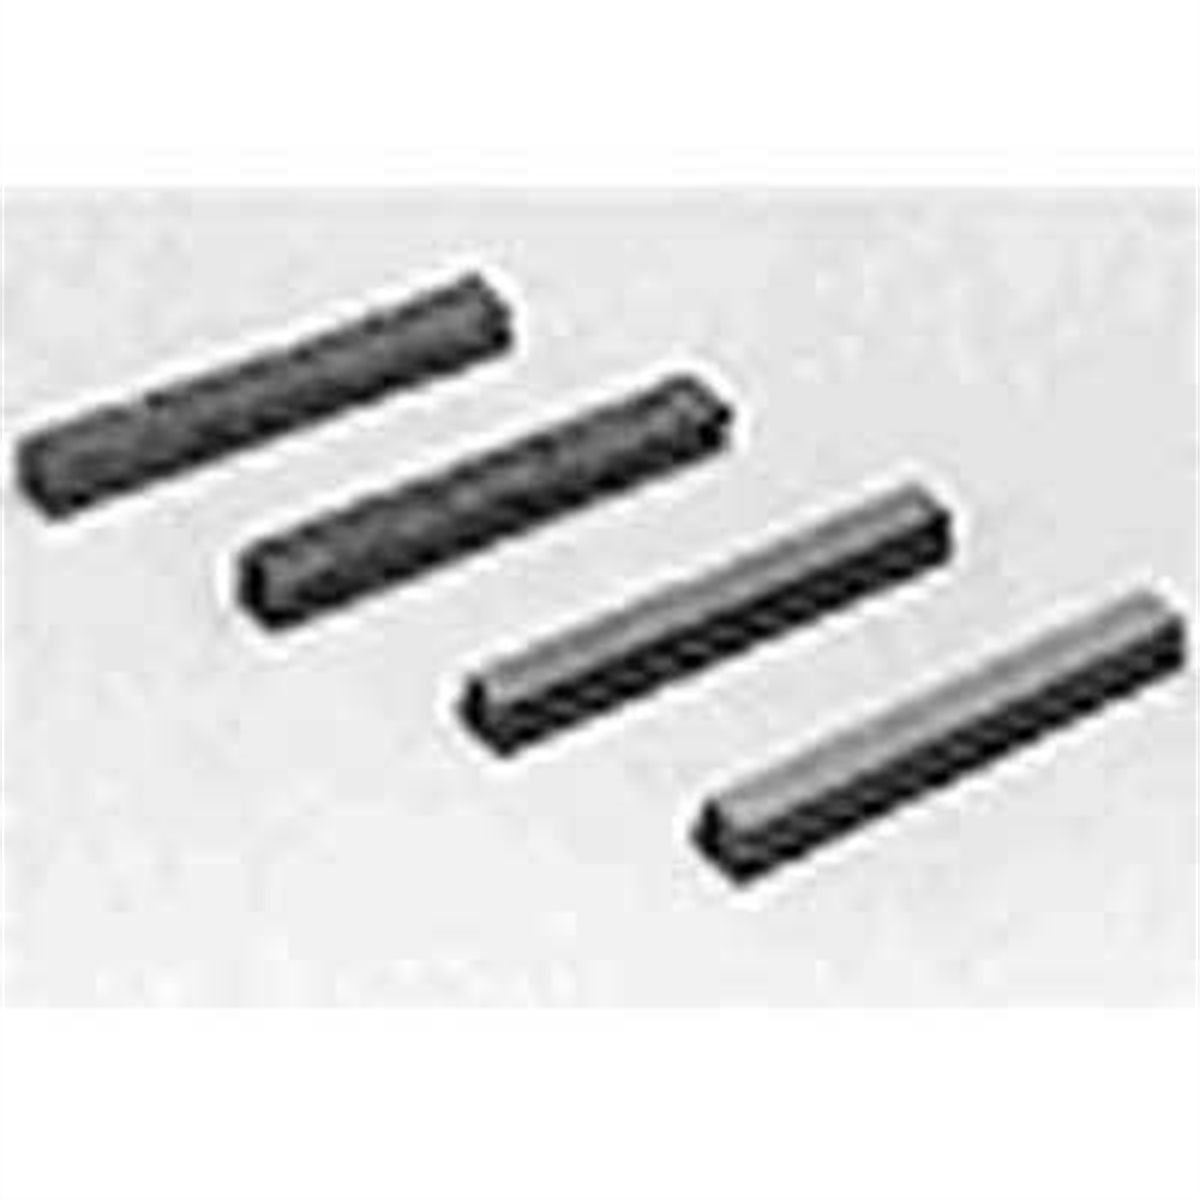 Replacement Stone Set for Ammco 500 - 220 Grit